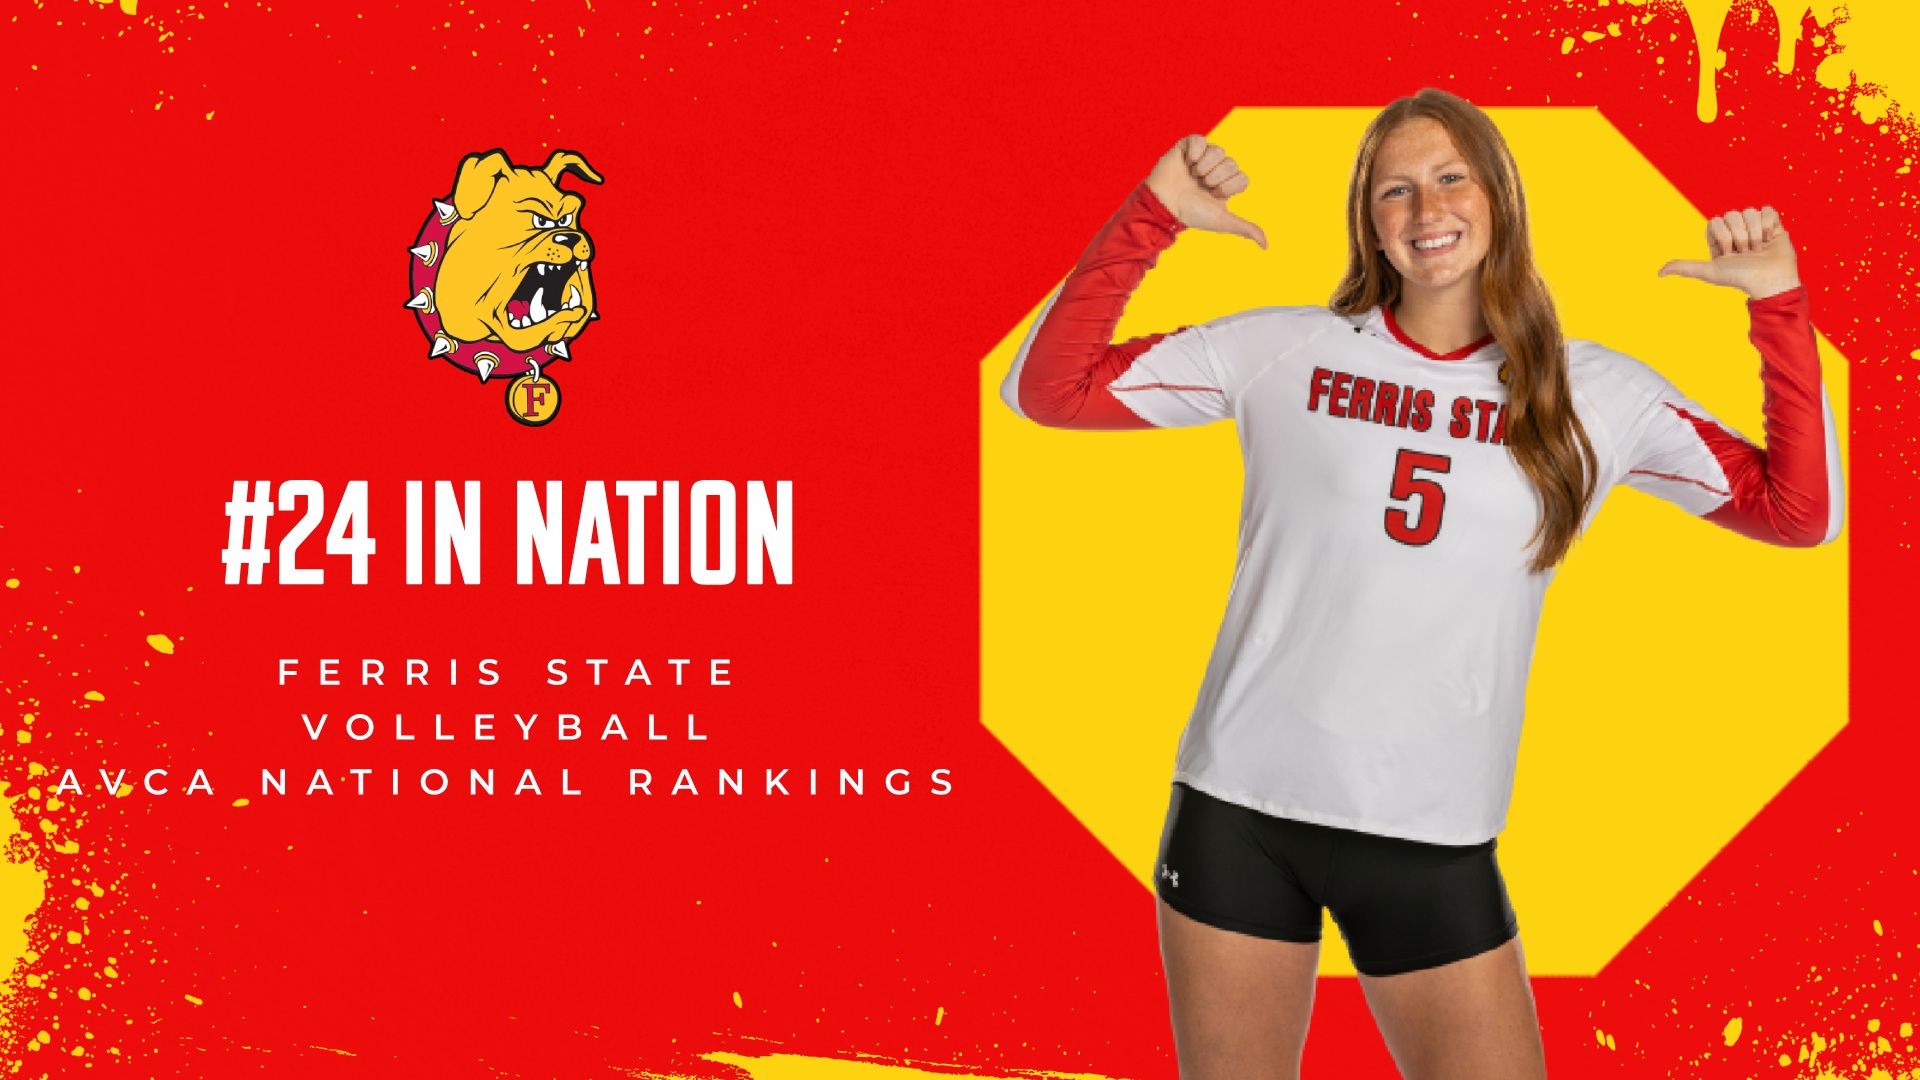 Ferris State Volleyball Enters AVCA D2 National Rankings At #24 This Week